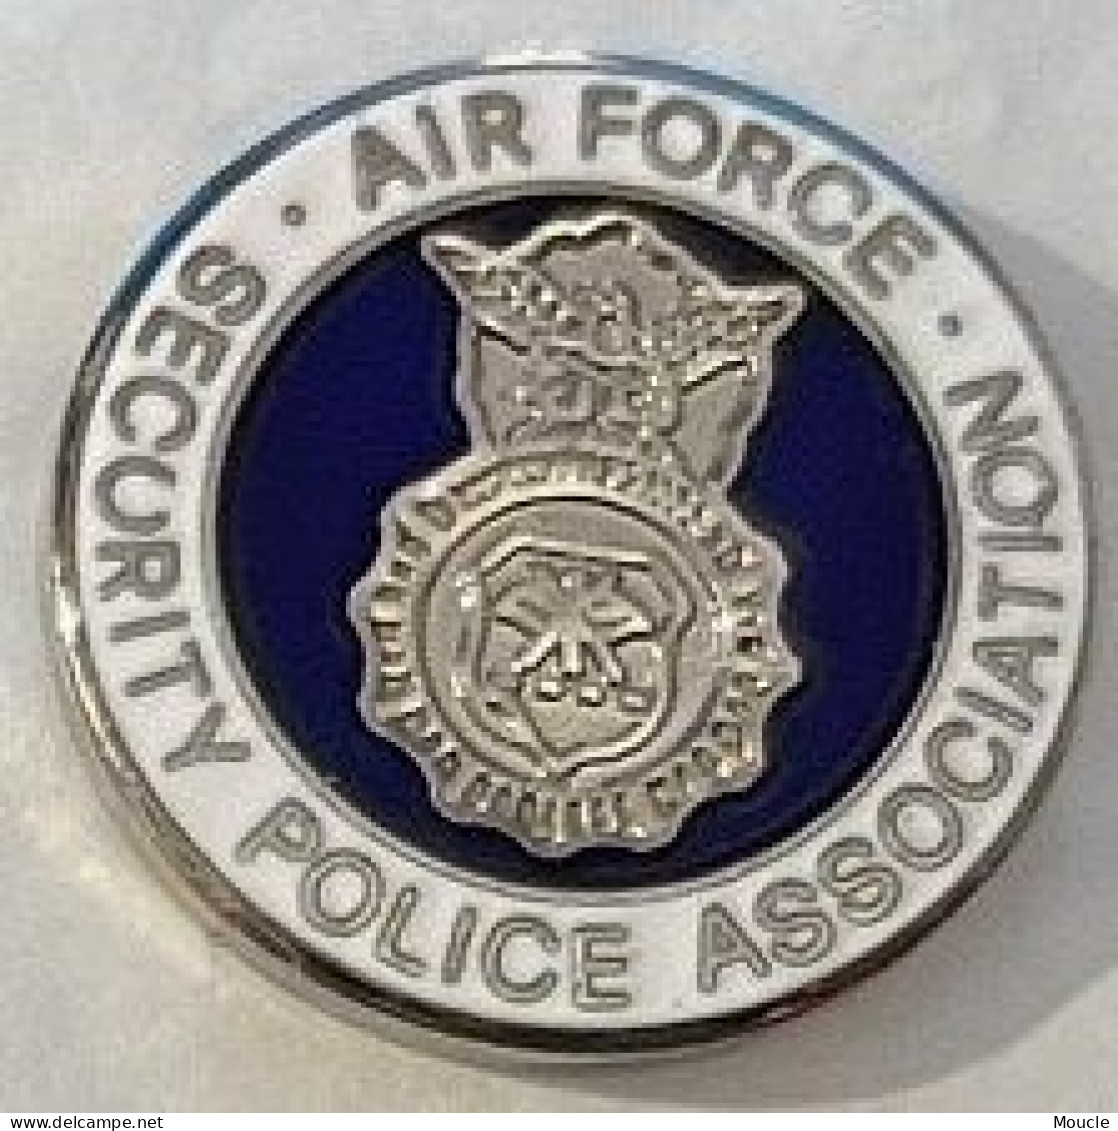 AIR FORCE - SECURITY POLICE ASSOCIATION - BADGE - POLIZEI - POLICIA -         (ROUGE) - Polizei